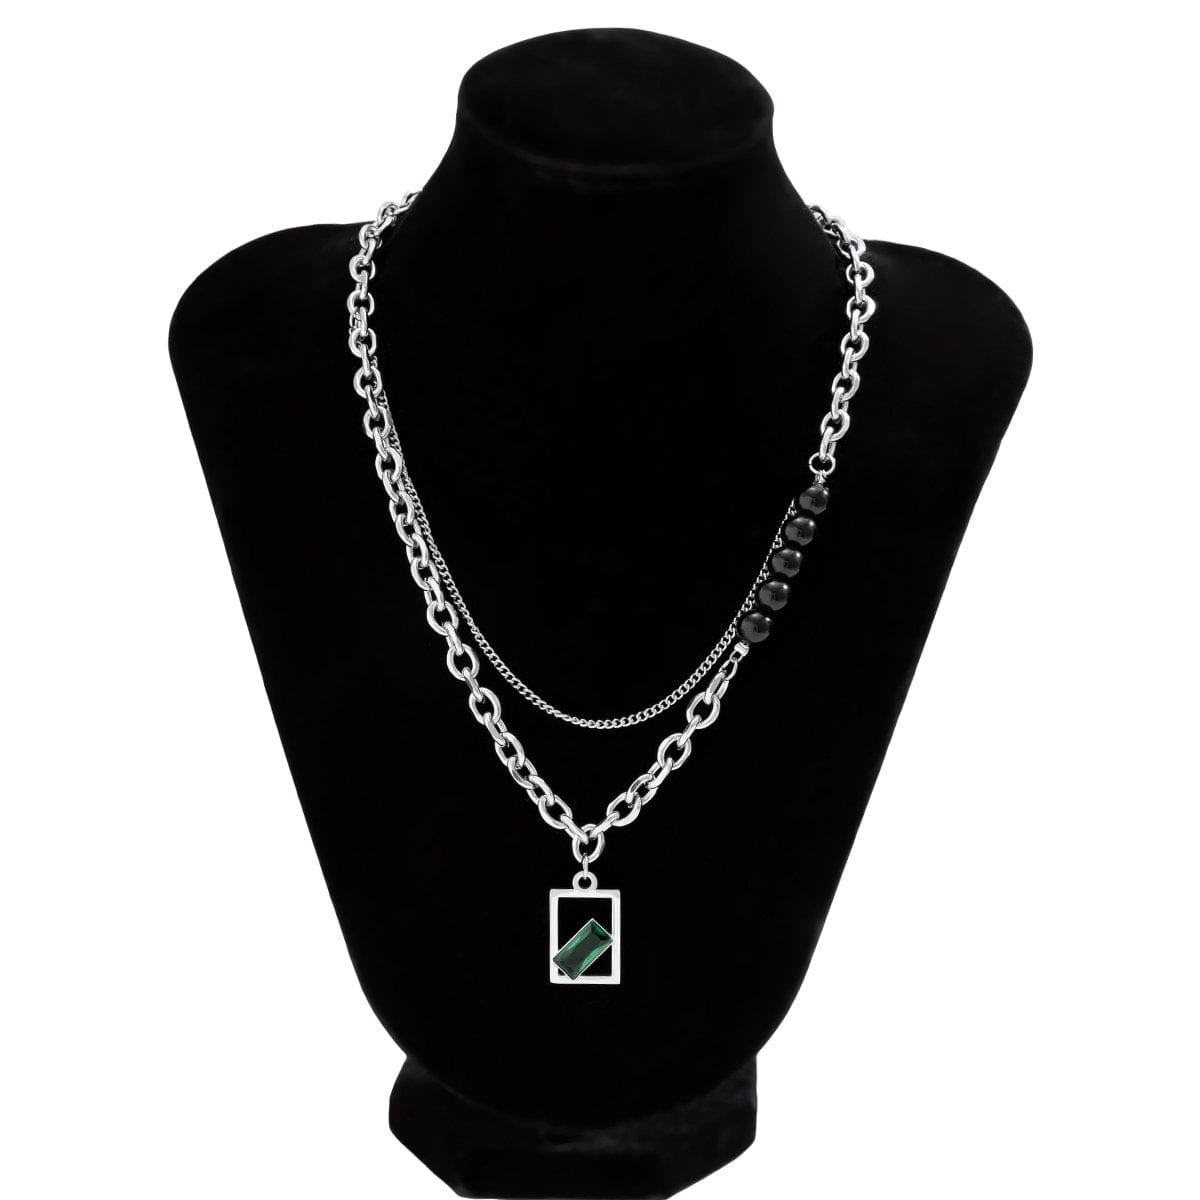 Stainless Steel Rhinestone Inlaid Square Pendant Ball Charm Curb Cable Chain Necklace